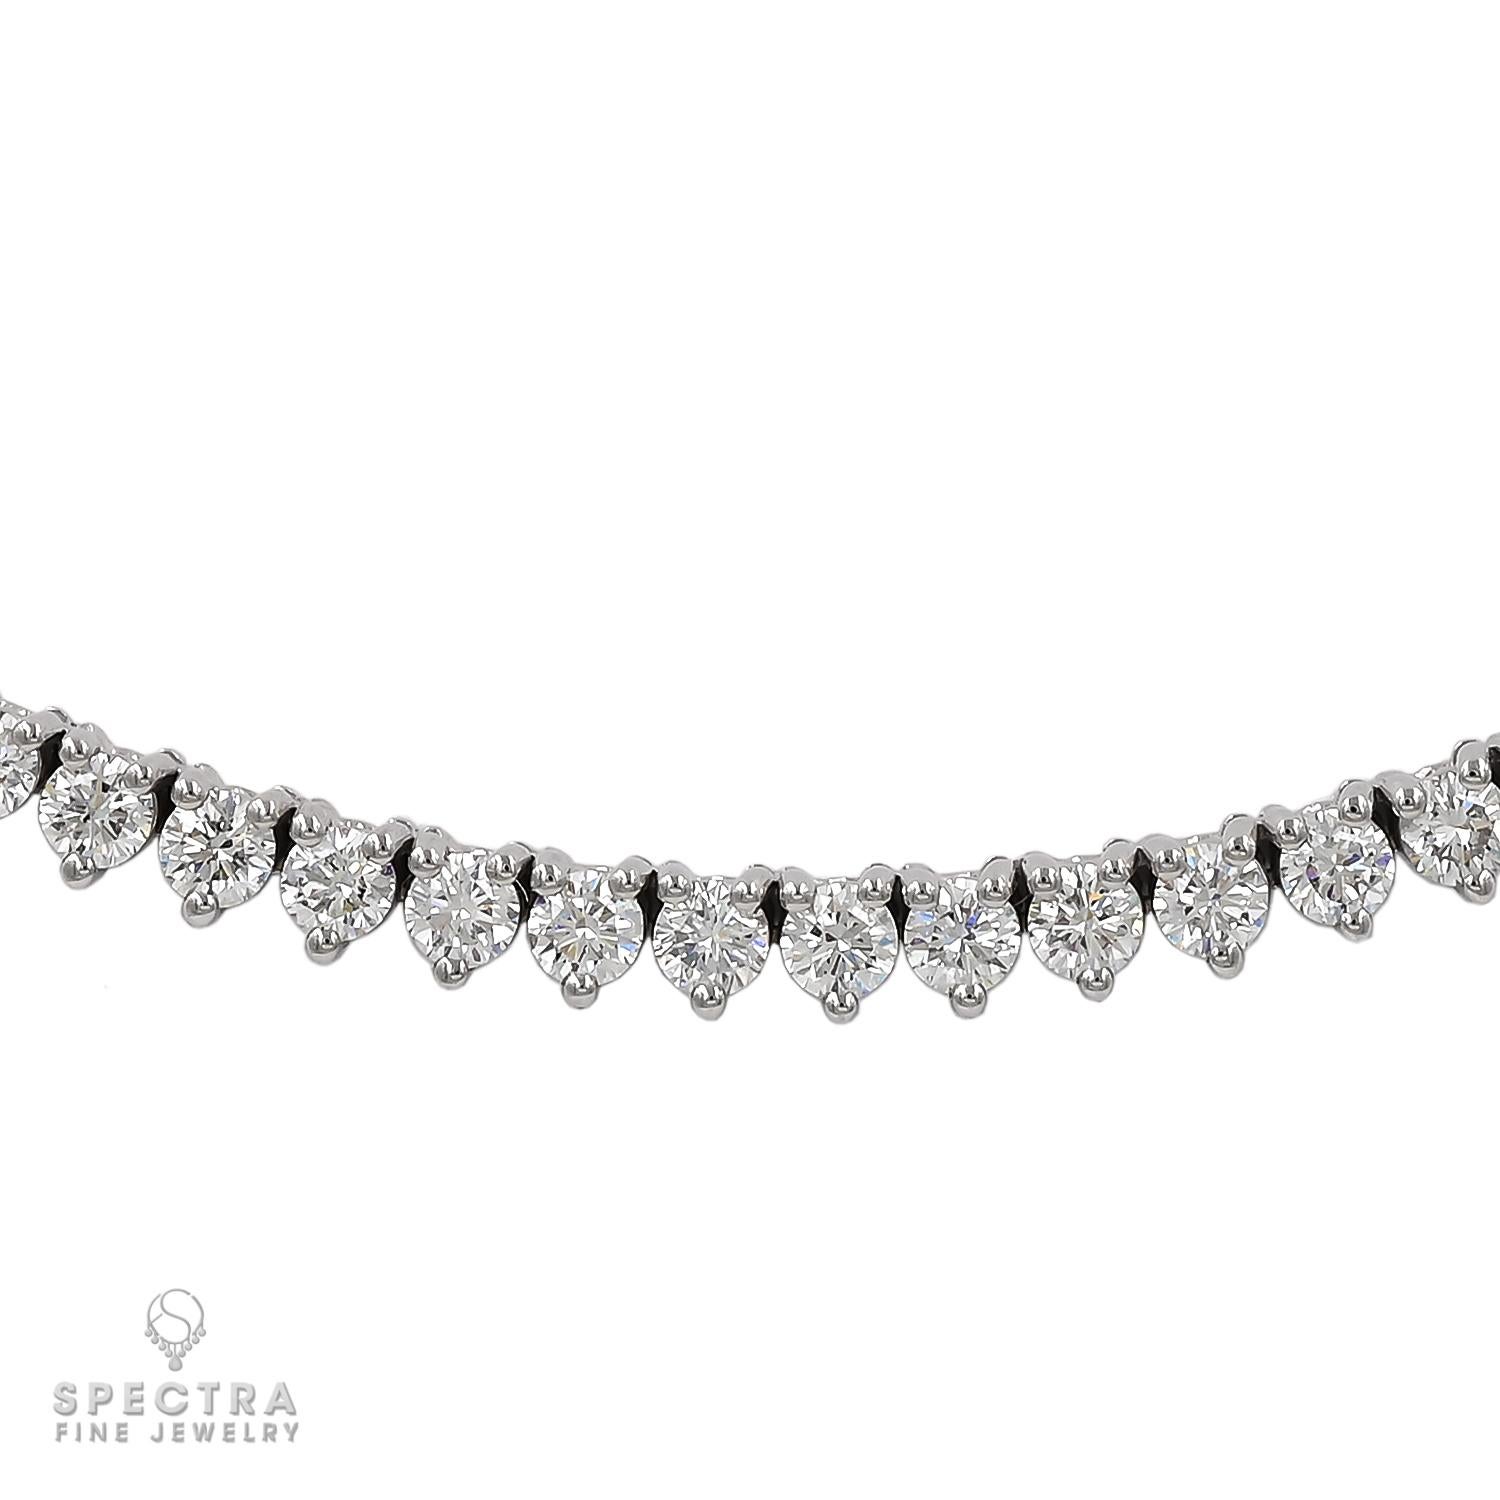 Indulge in the ultimate luxury with this exquisite 7.89cts Round Diamond Tennis Necklace in 18k White Gold. Every detail of this stunning piece speaks of elegance and sophistication.

Featuring 135 round brilliant-cut diamonds, totaling an